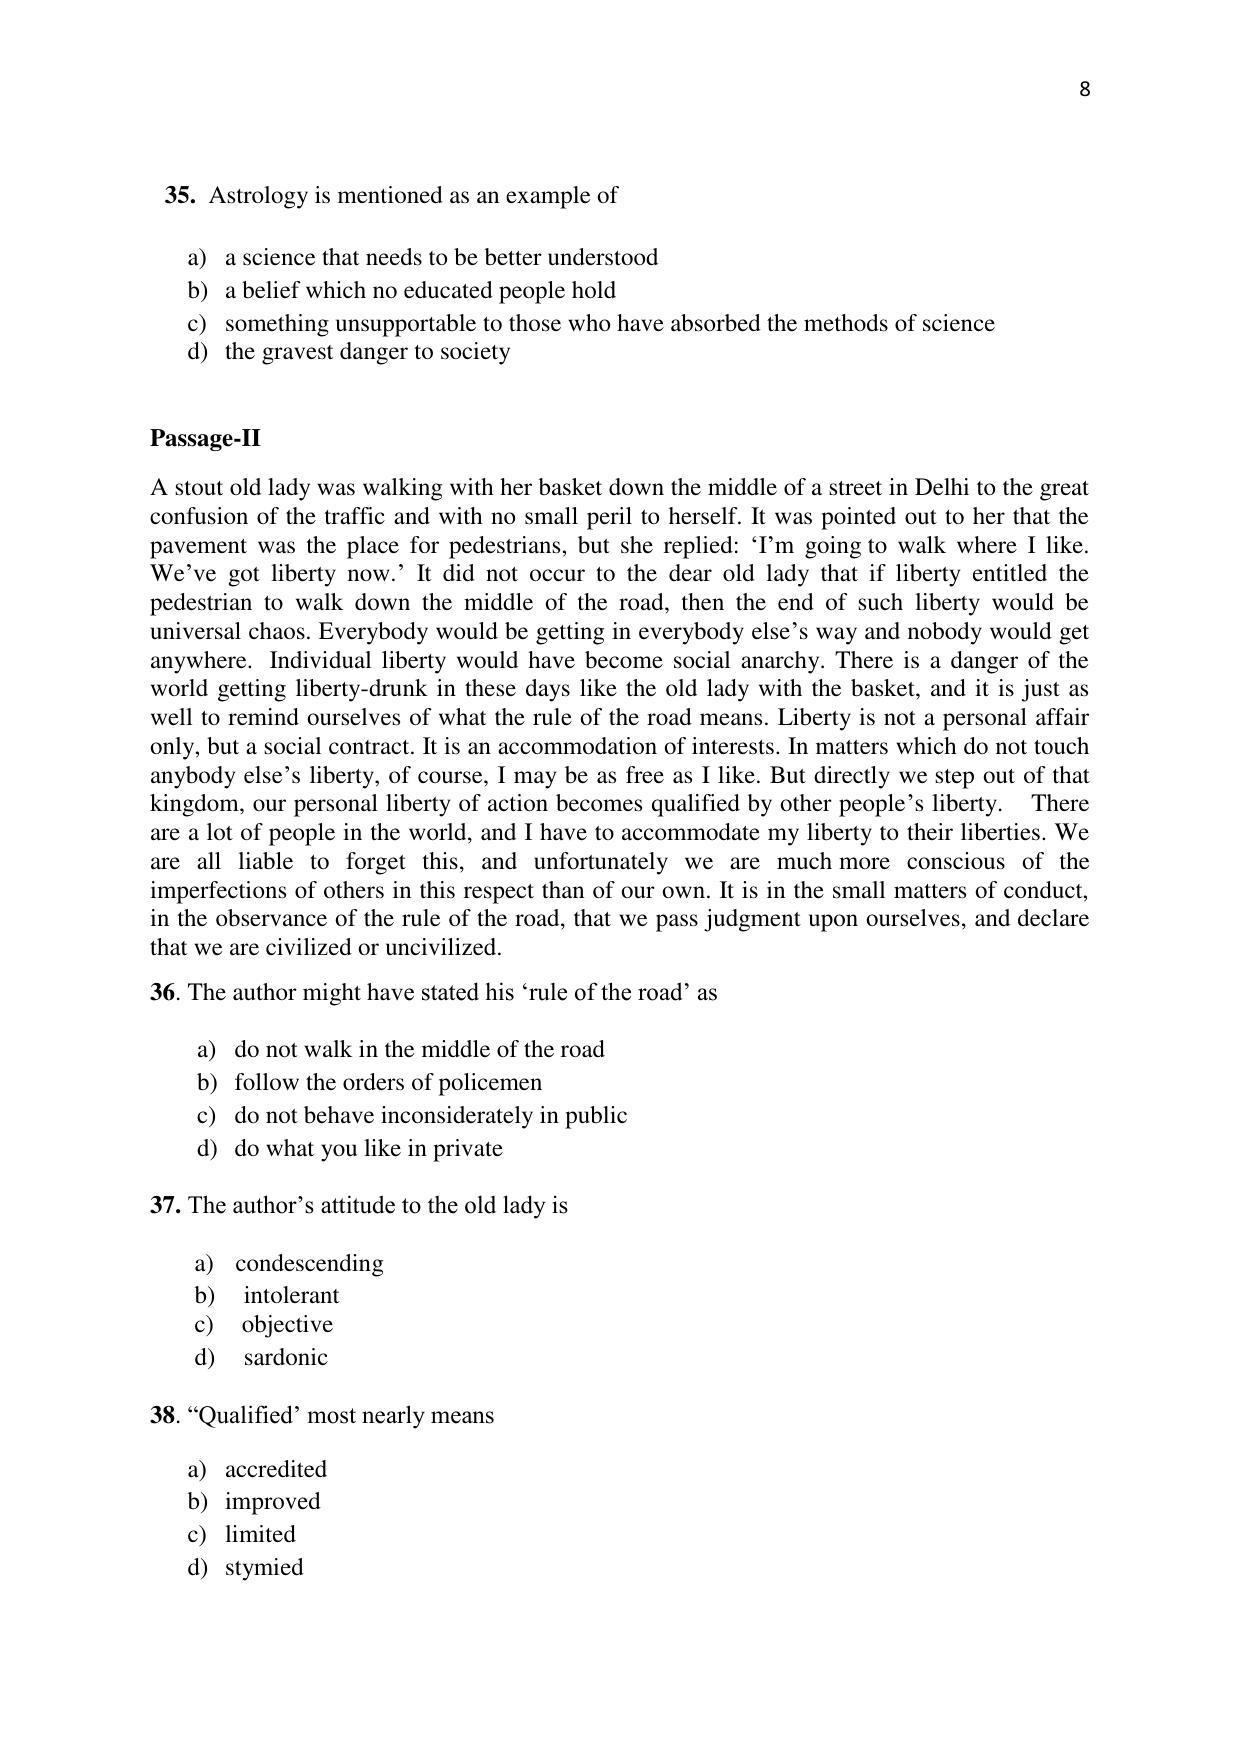 KMAT Question Papers - November 2016 - Page 8